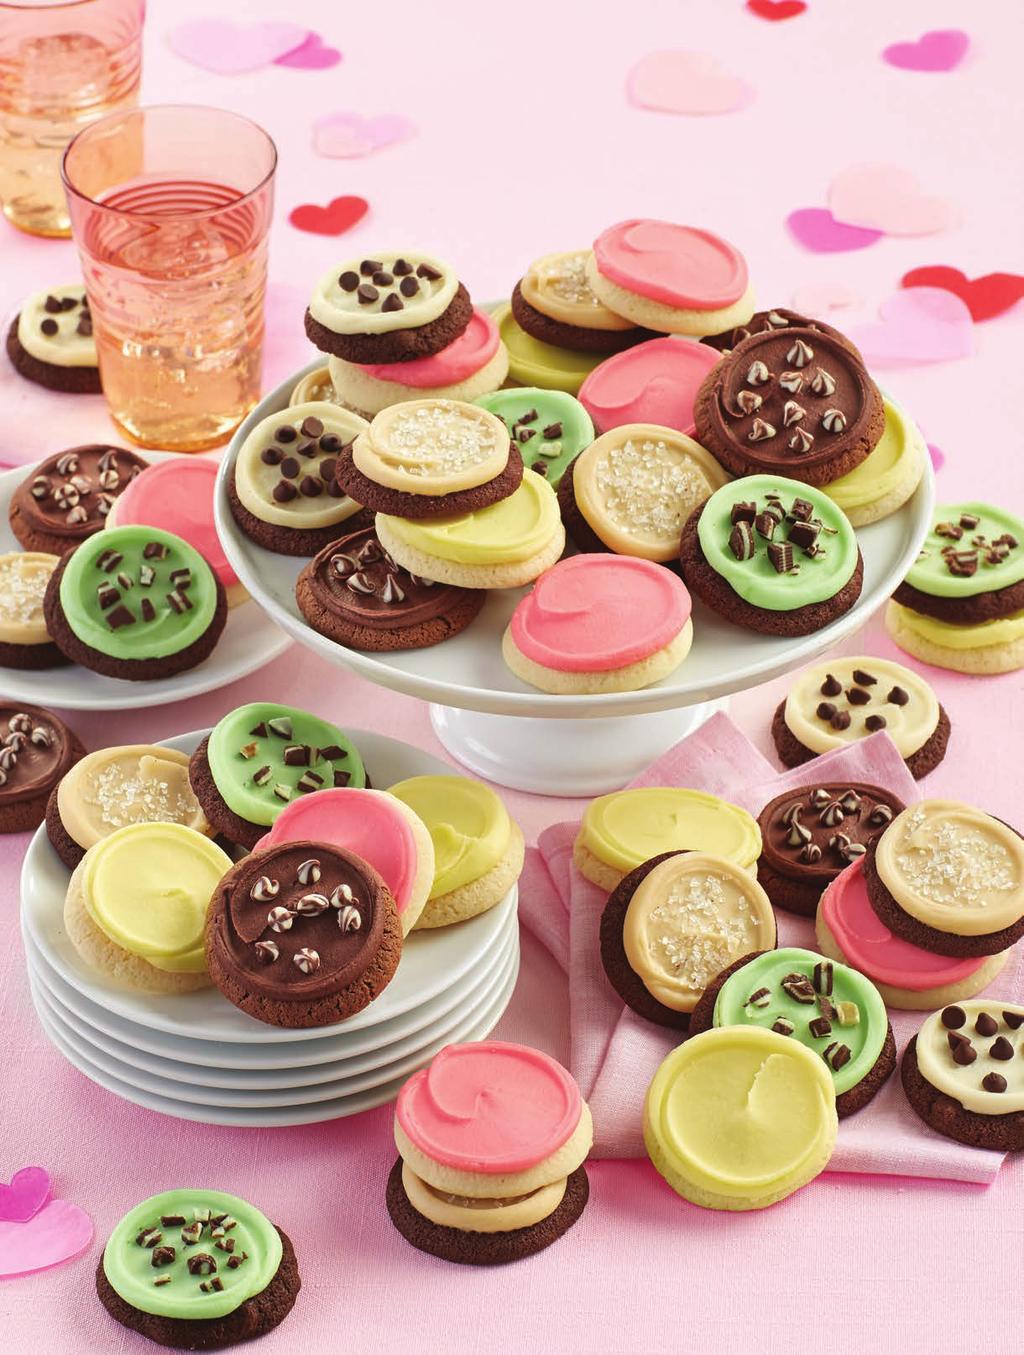 Big Flavors for Sweethearts Gifts They Will LOVE!